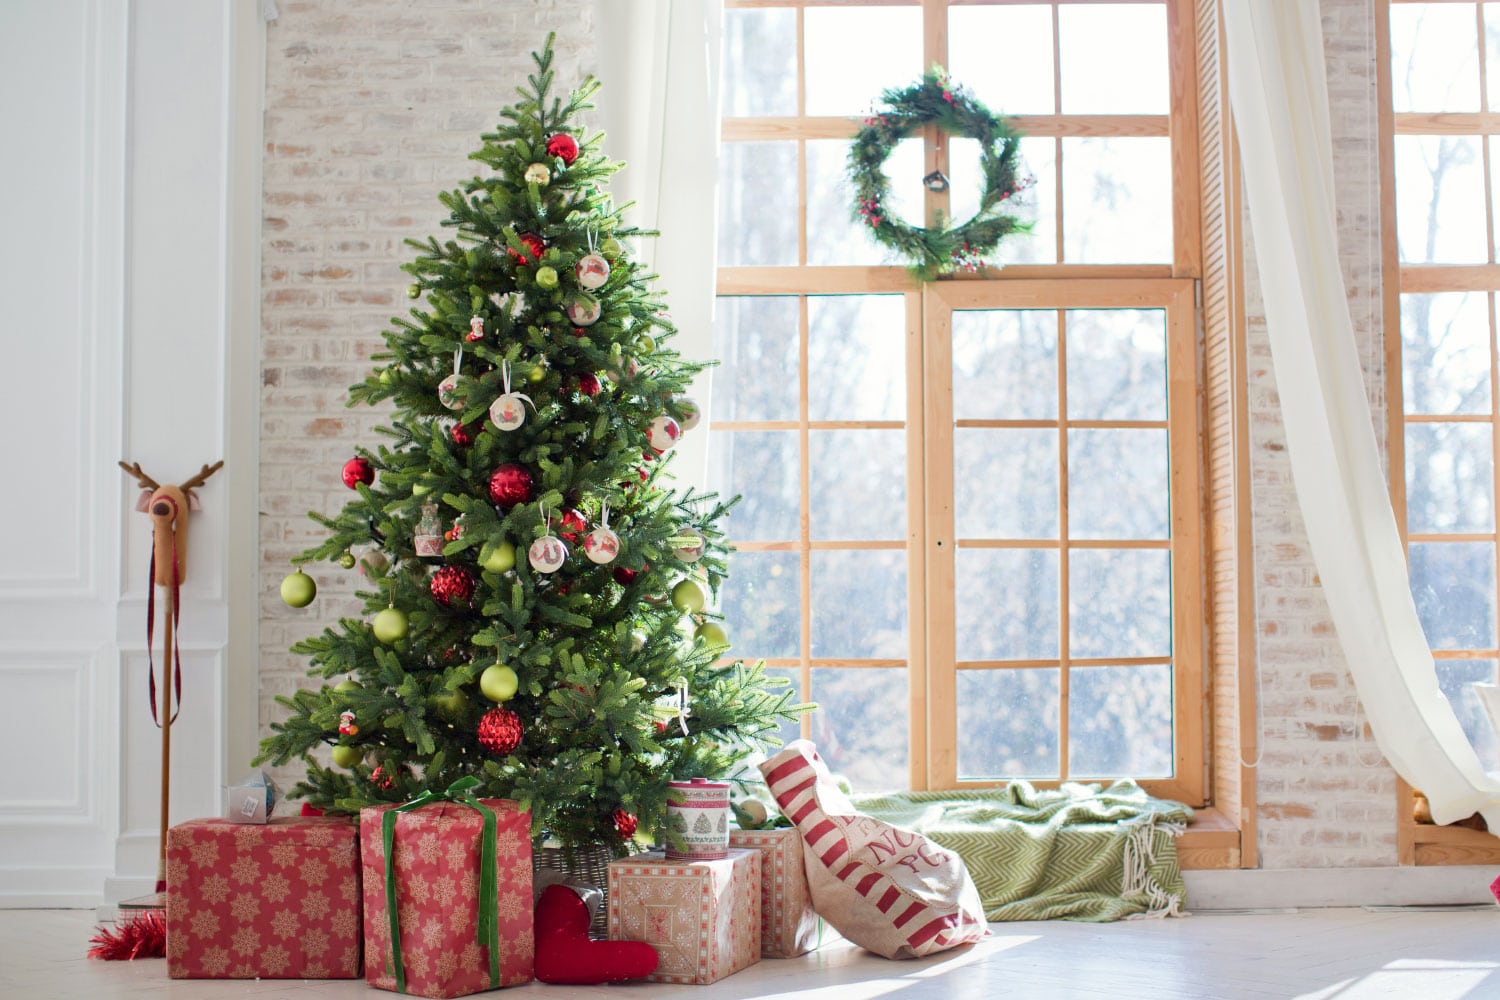 Dreaming of a Pest-Free Home This Holiday Season?